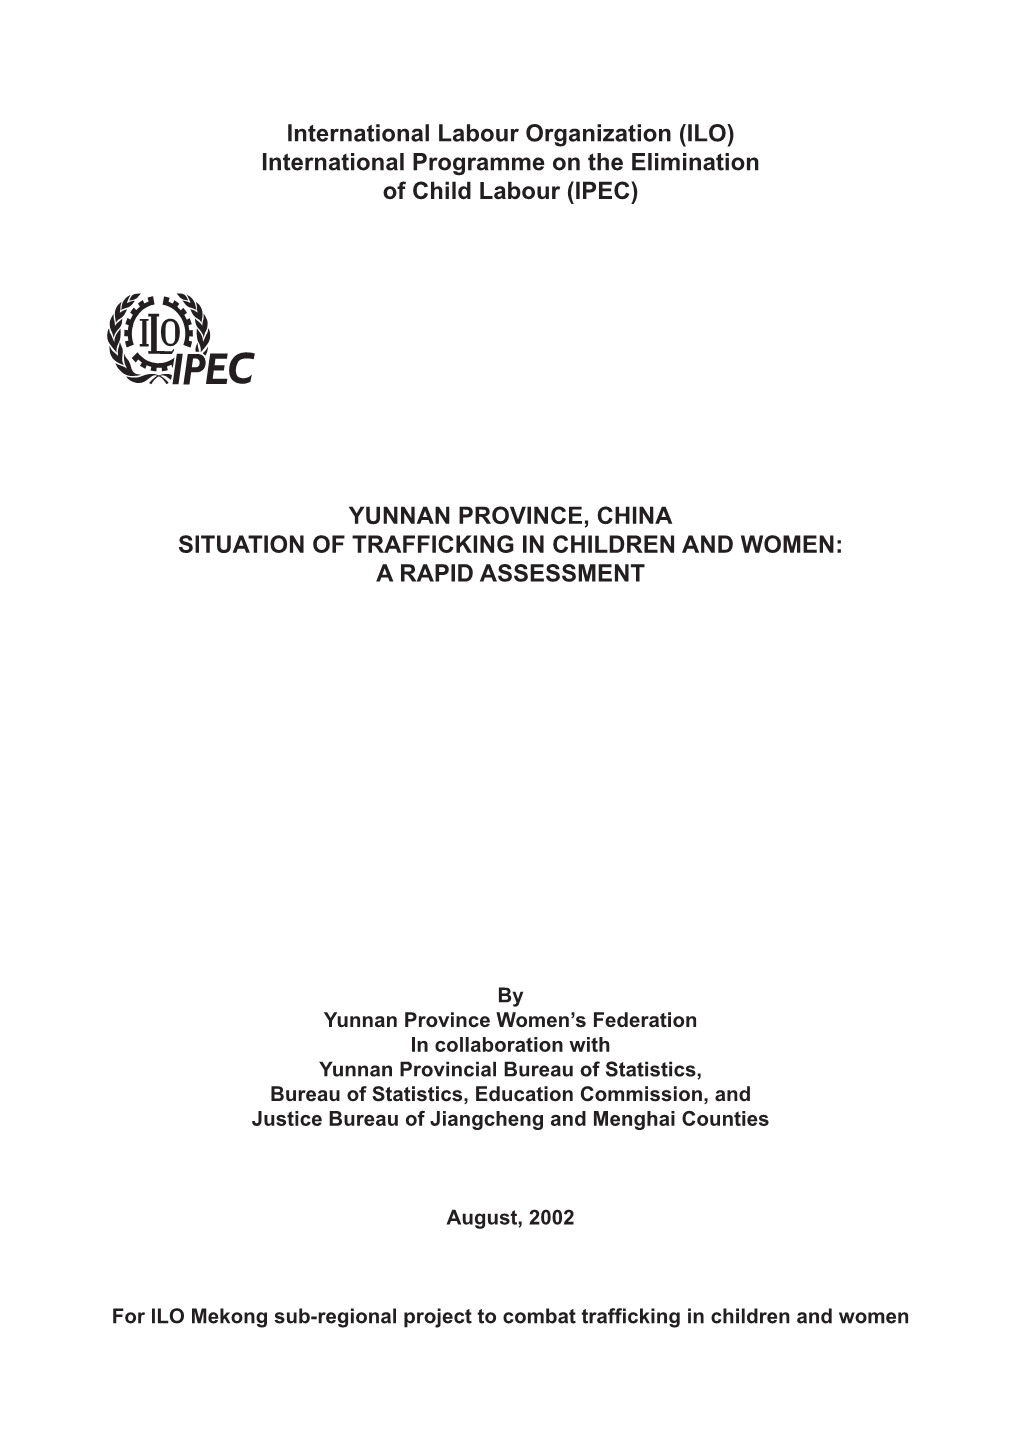 Yunnan Province, China Situation of Trafficking in Children and Women: a Rapid Assessment